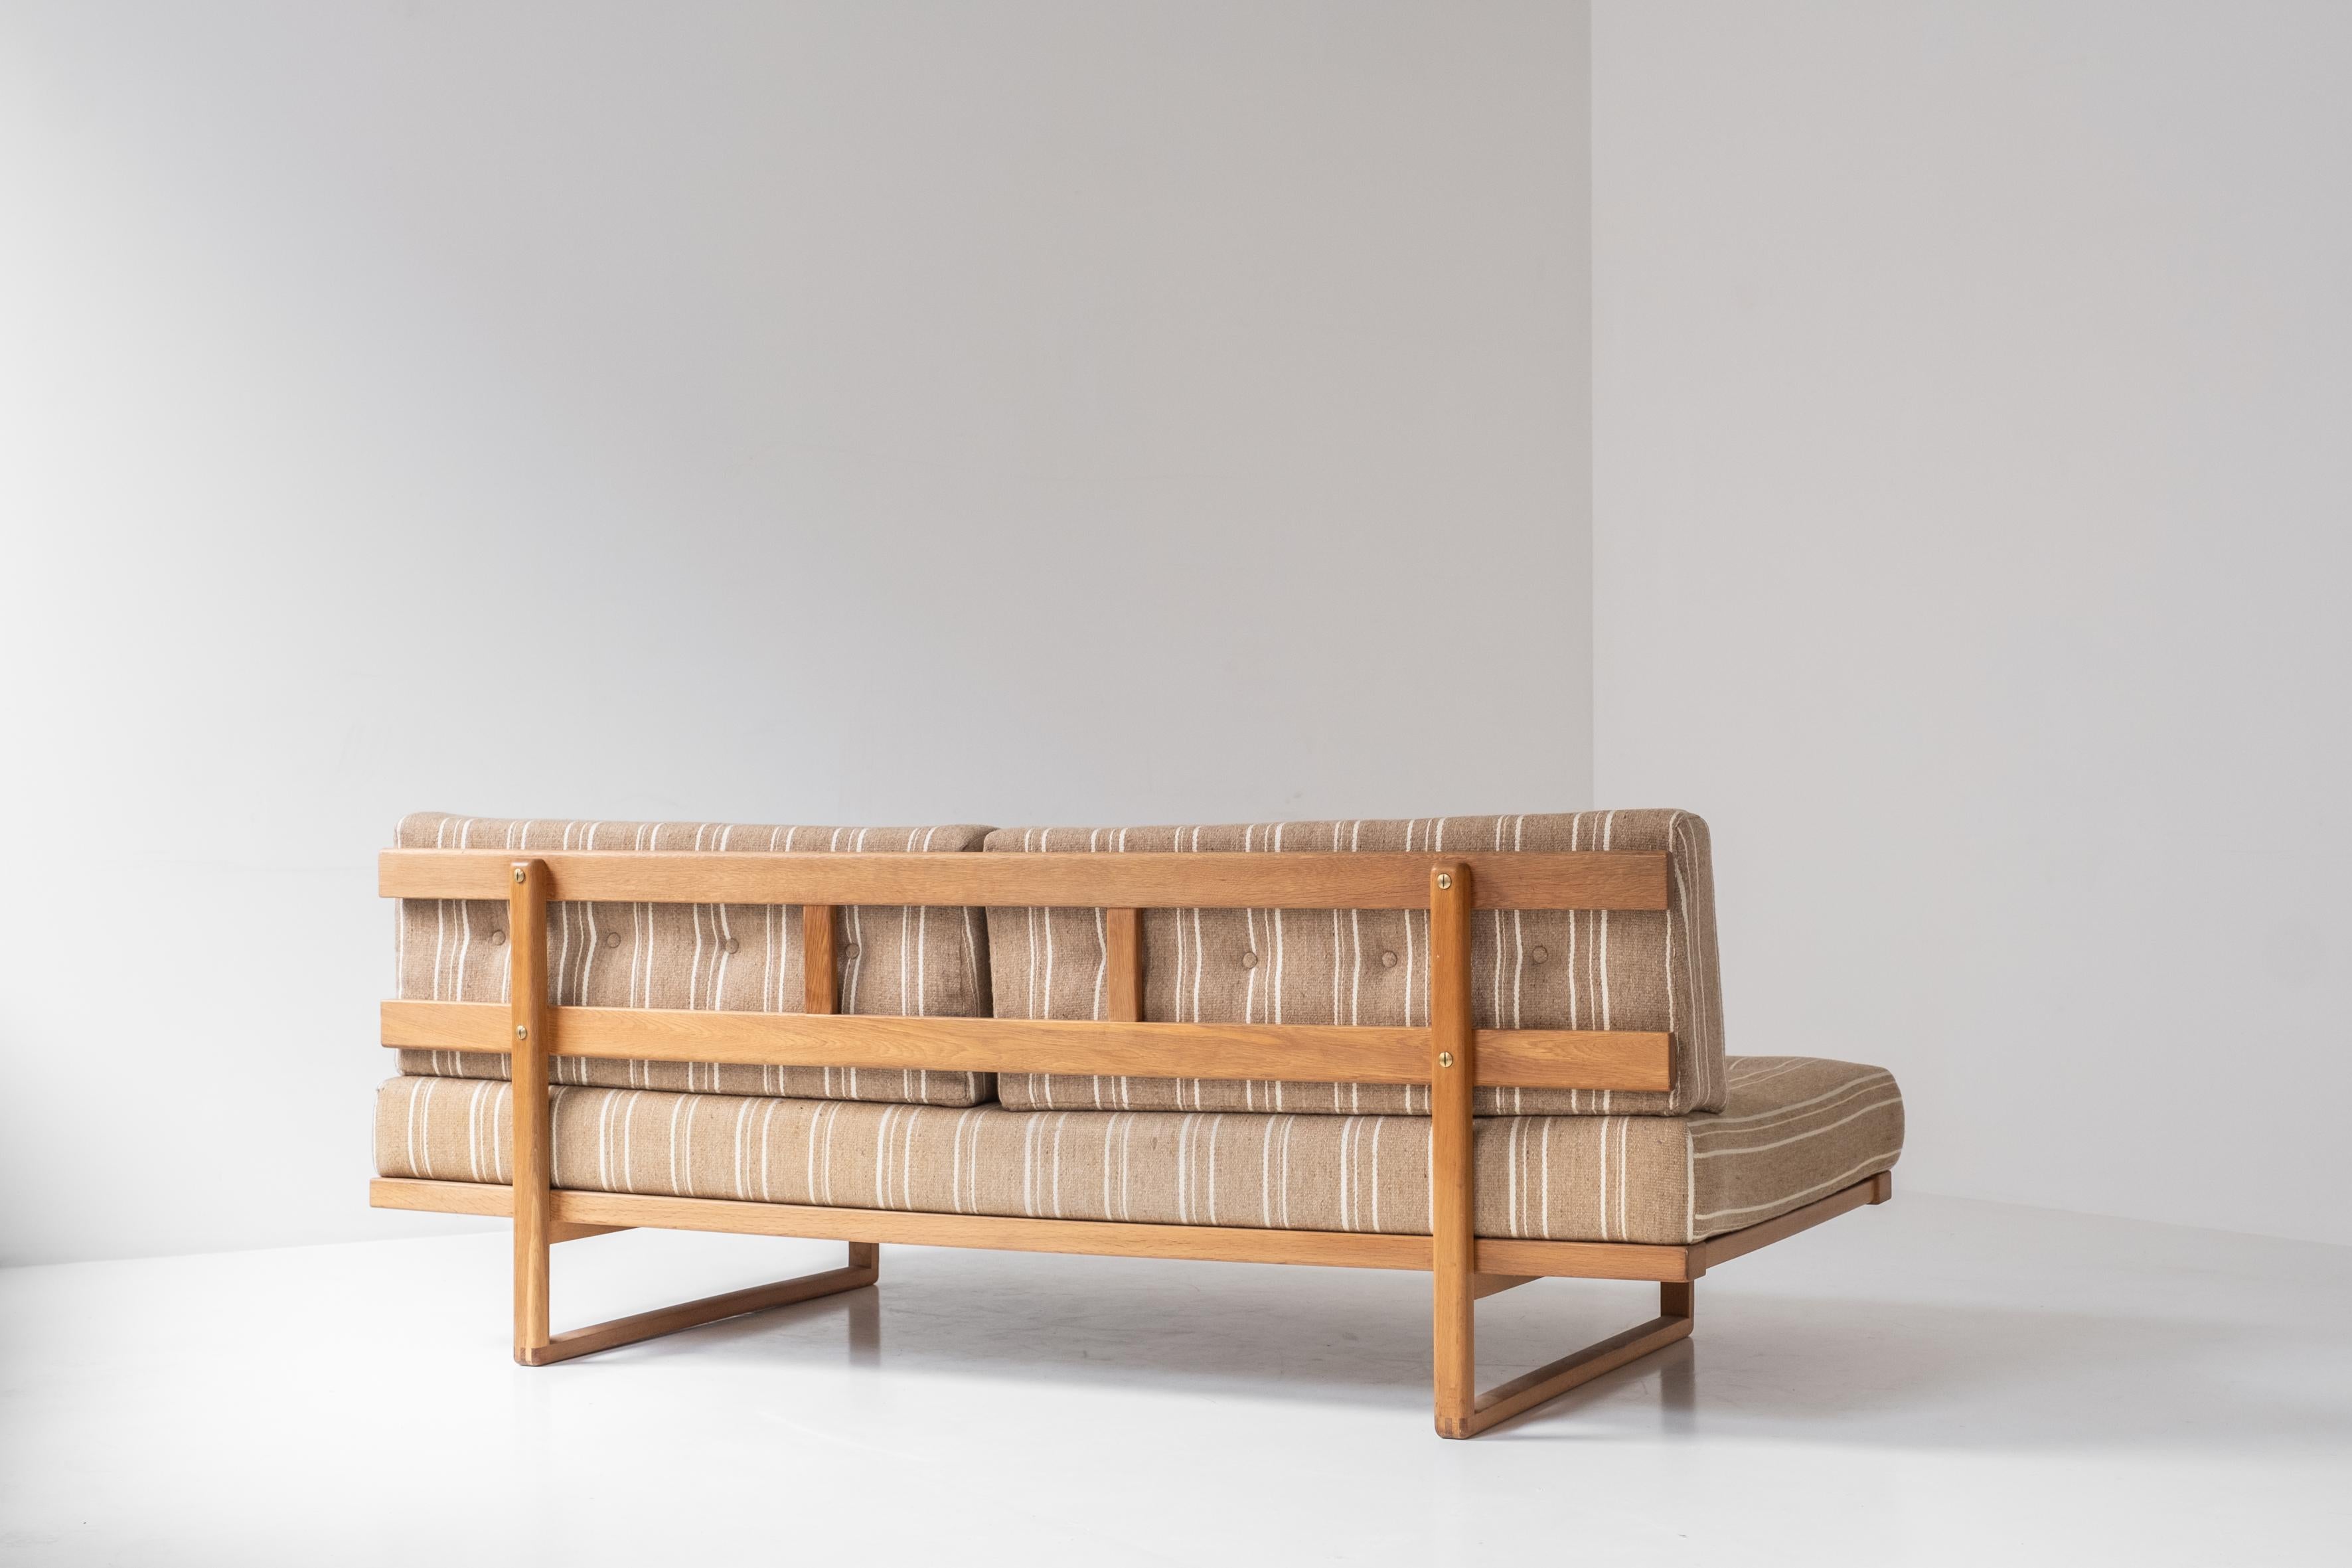 Danish Sofa or daybed ‘Model No 4311’ by Børge Mogensen for Fredericia, Denmark 1950s. For Sale